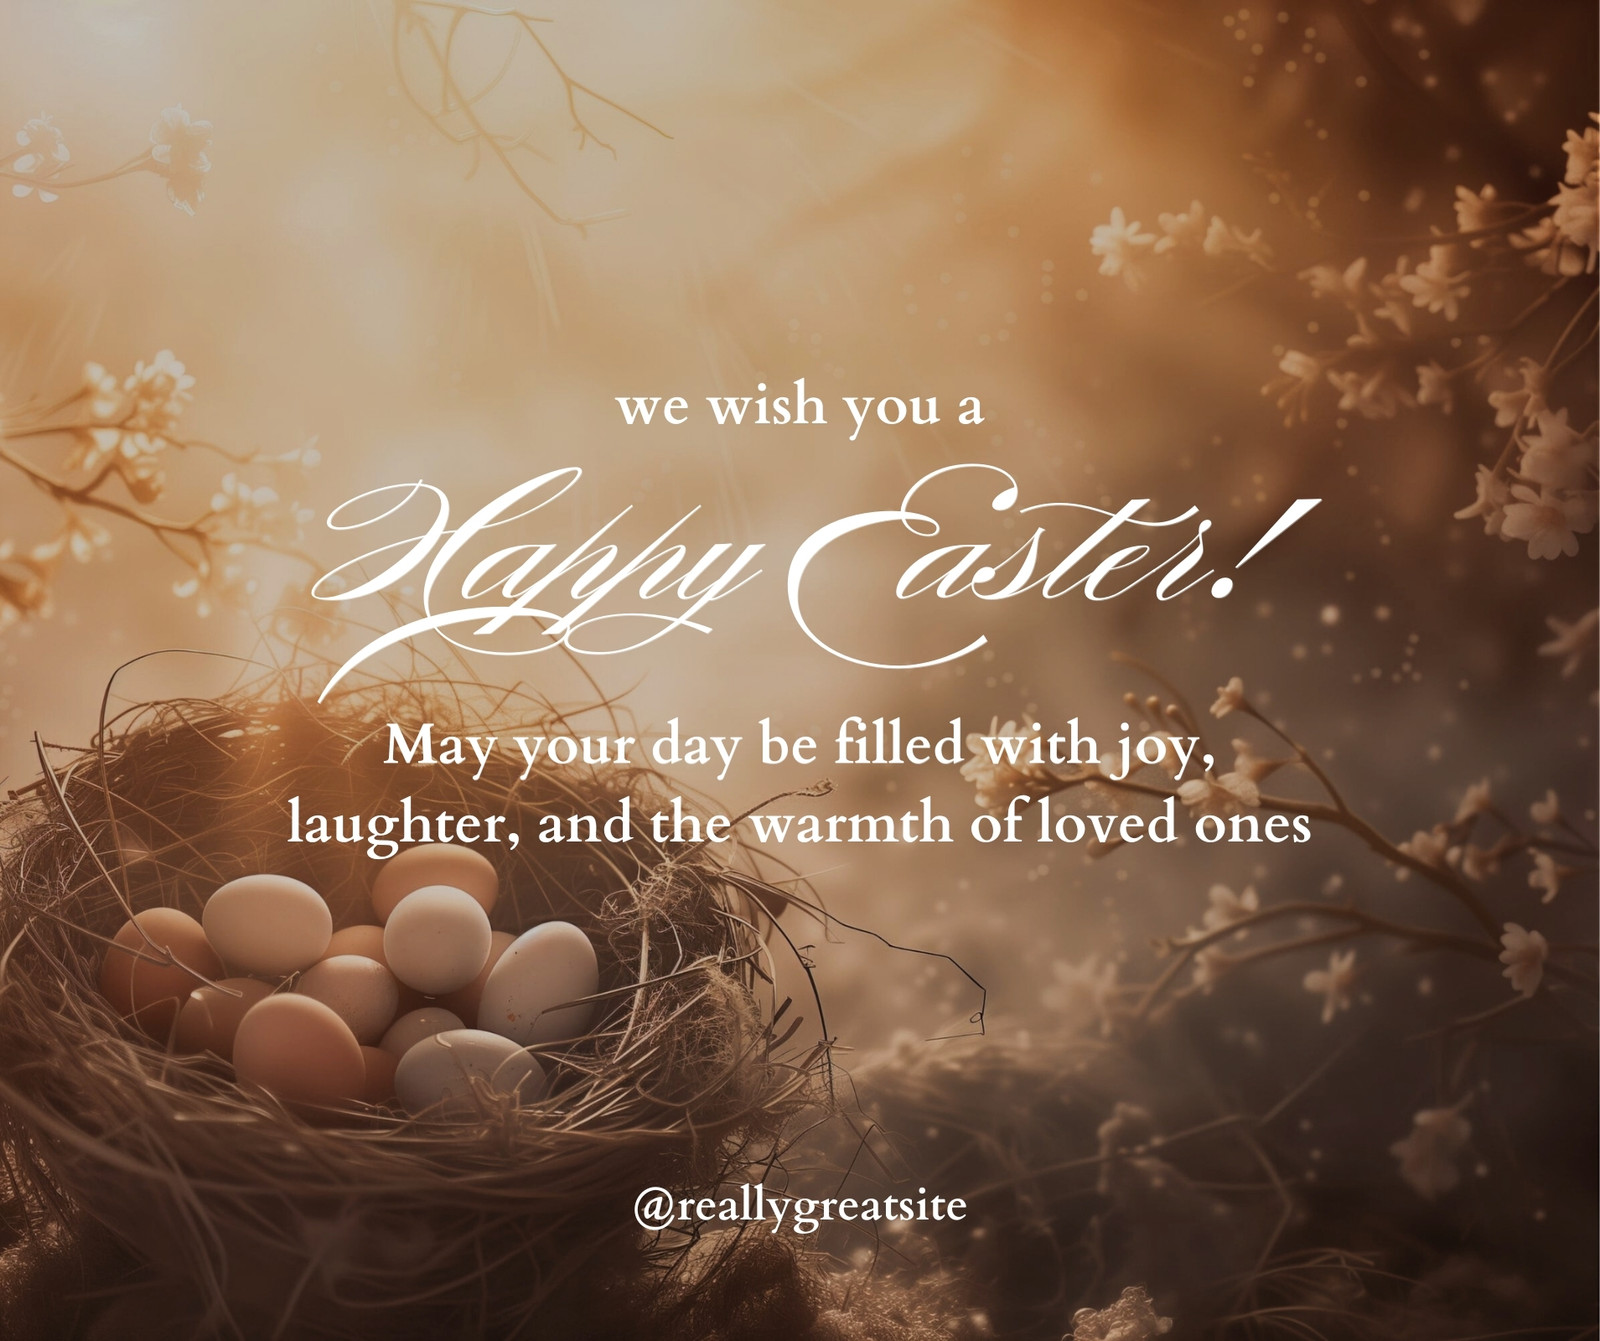 8 Happy Easter Images to Post on Facebook, Twitter and Instagram